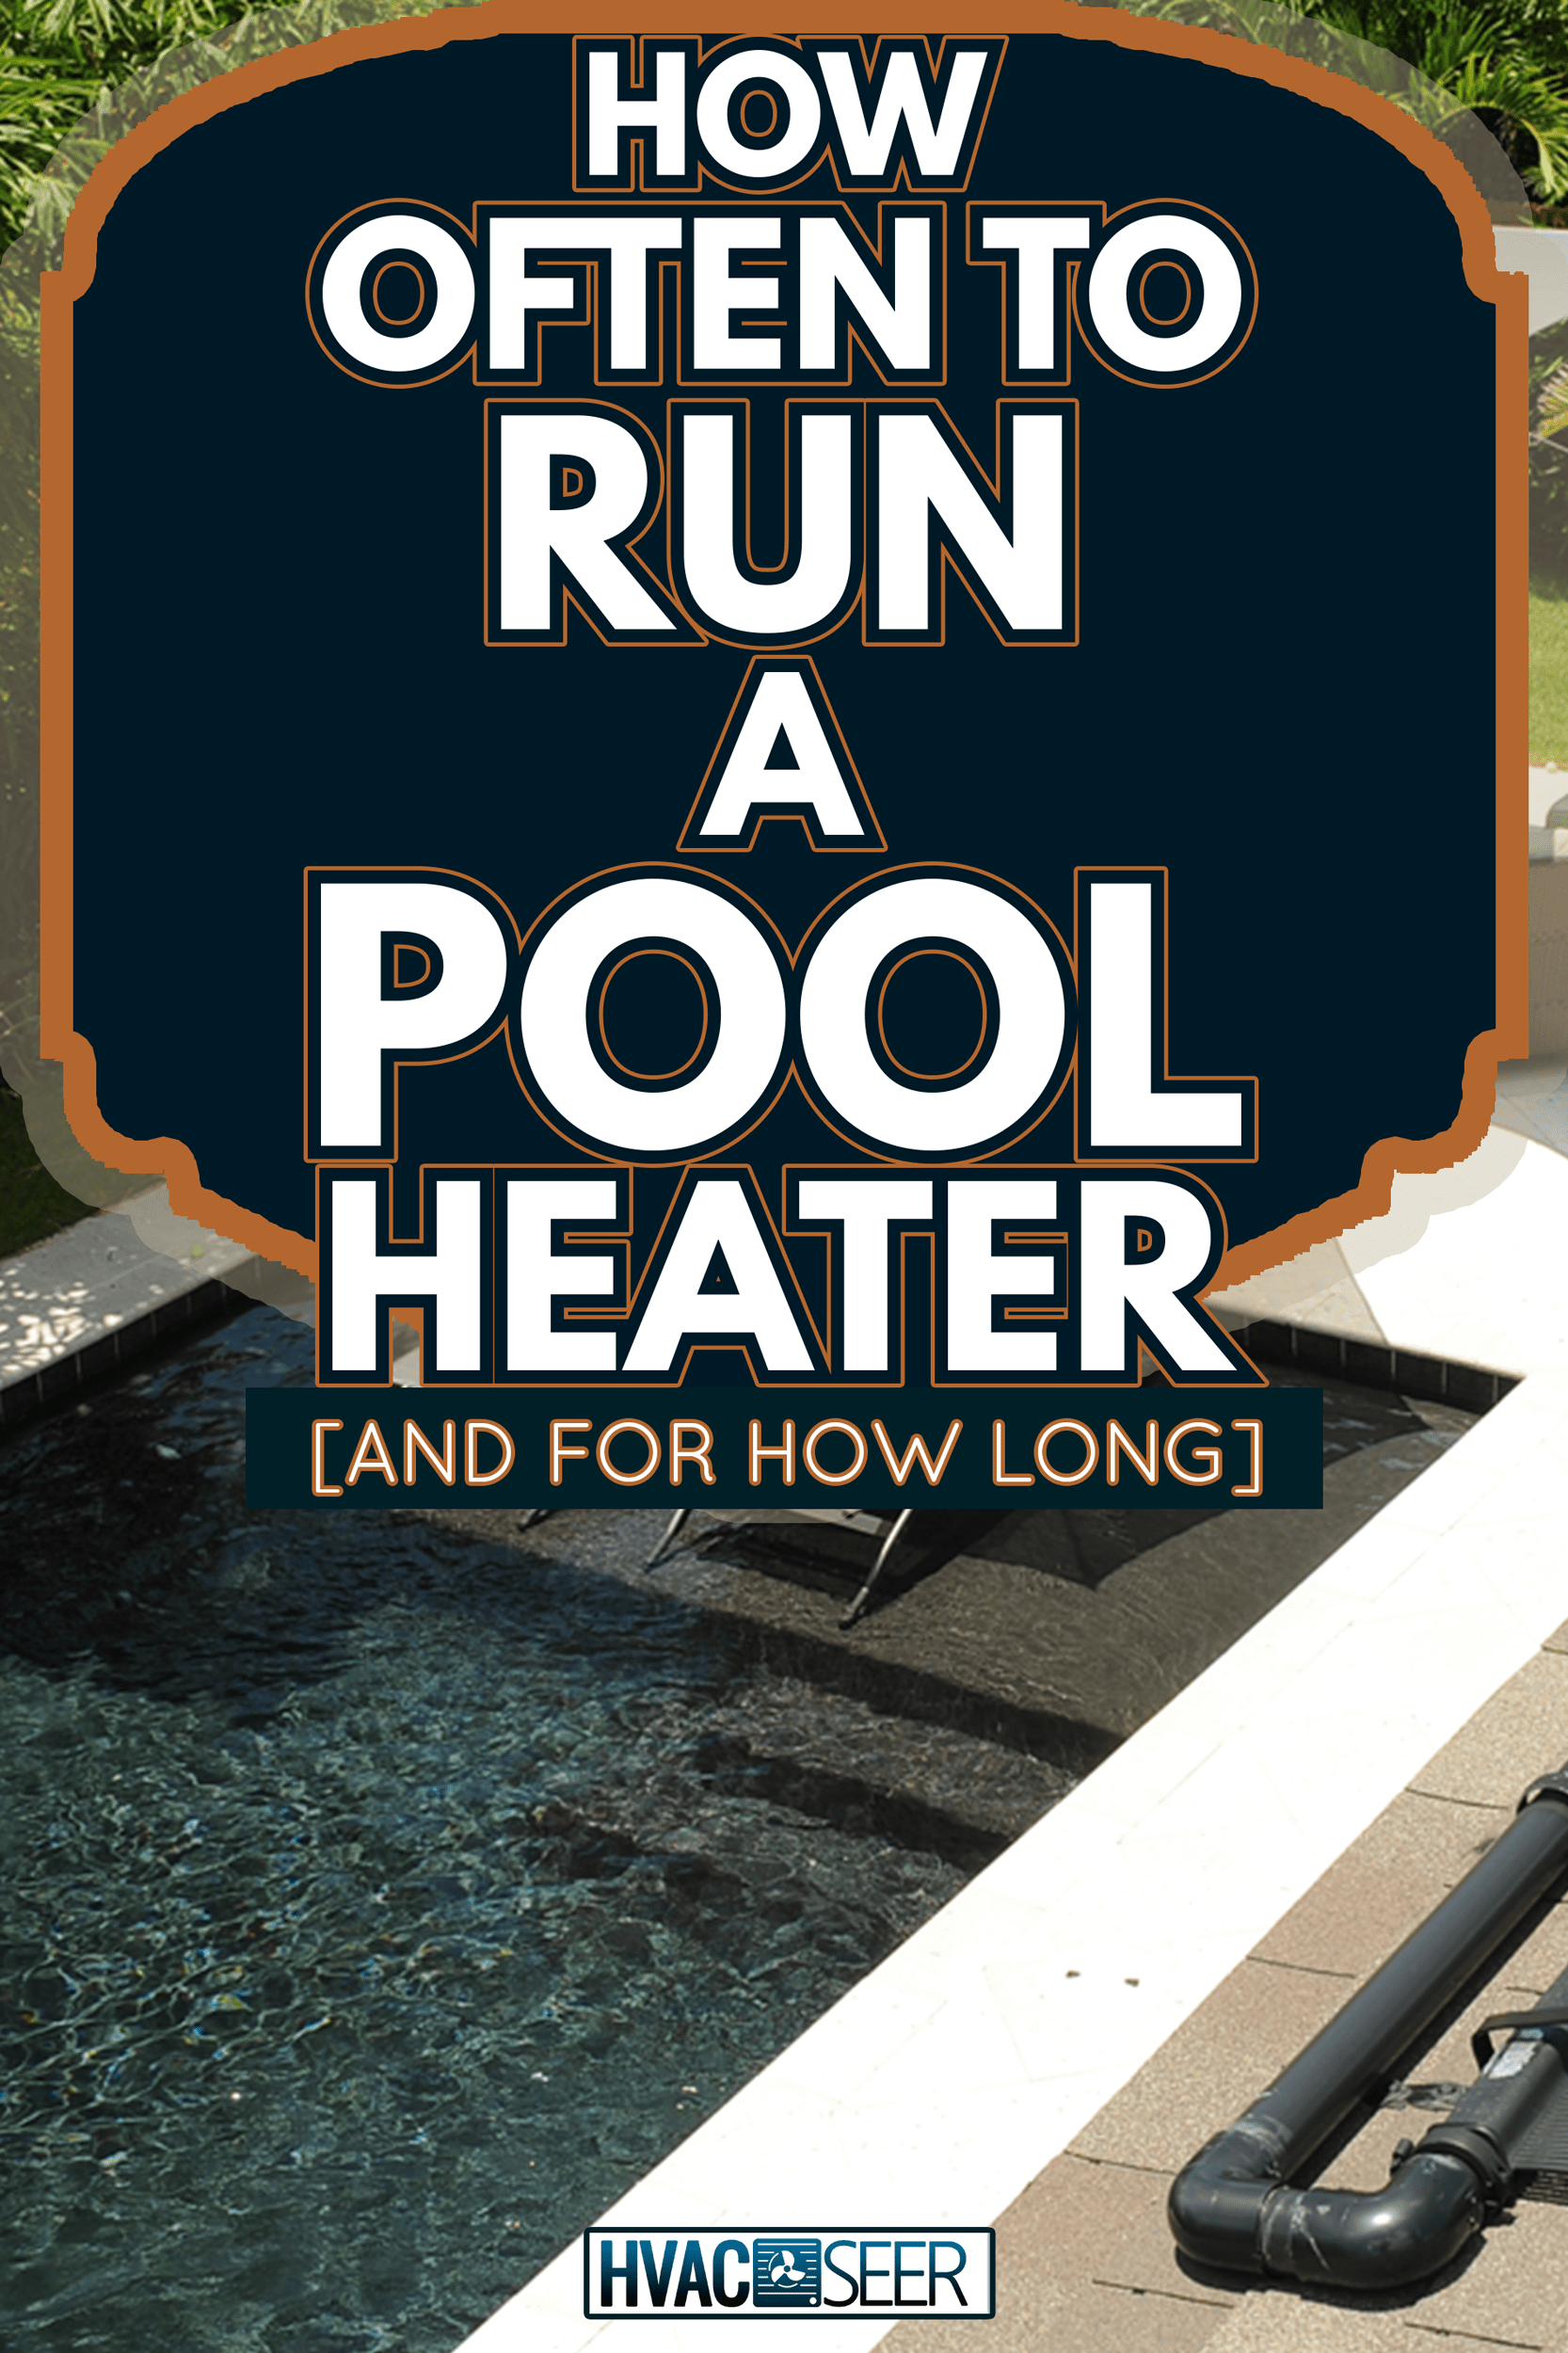 Residential Passive Solar Pool Heater, Pool And Backyard - Residential Passive Solar Pool Heater, Pool And Backyard